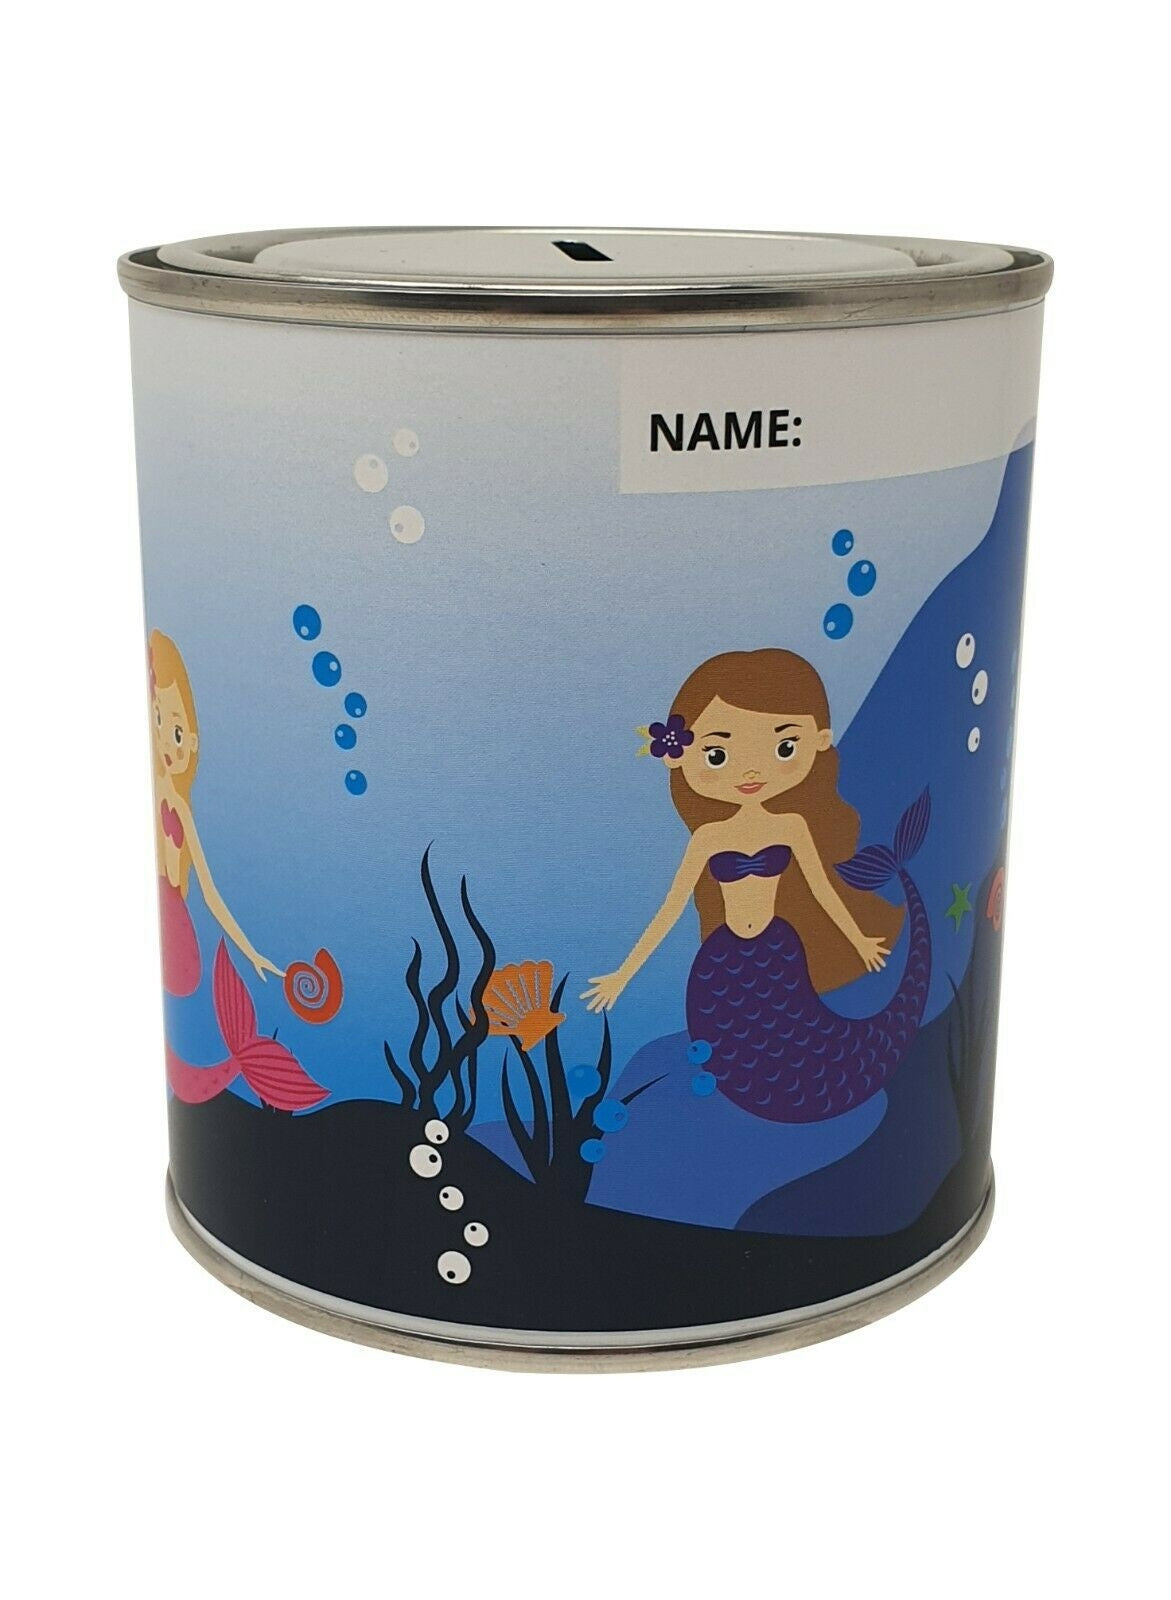 Mermaid Money Box Tin with Removable Lid for Kids